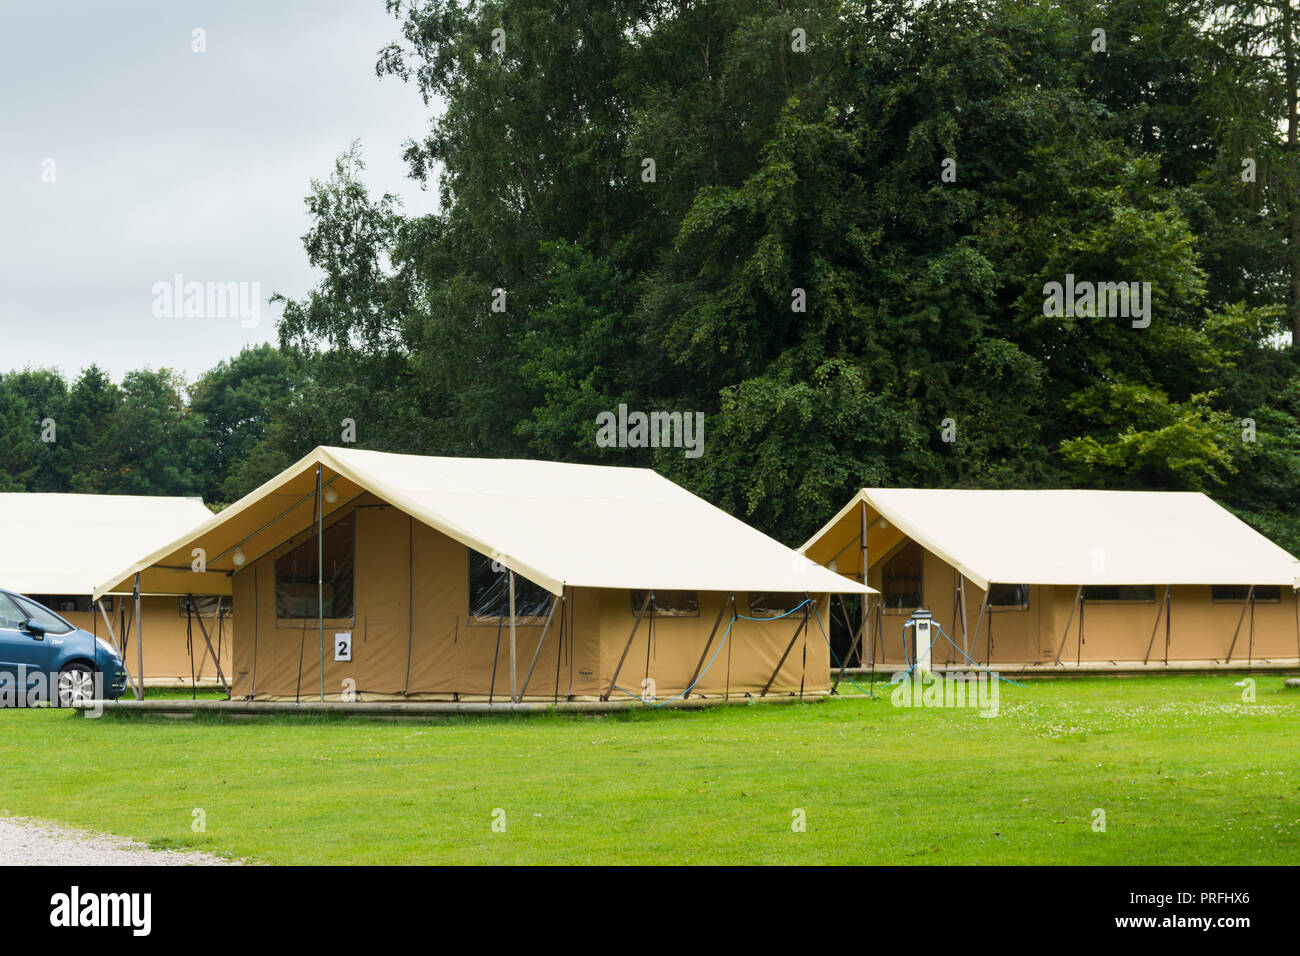 Glamping Tents at the Windermere Camping and Caravanning Club site, well-equipped semi-permanent pre-erected two-bedroom, six berth safari tents. Stock Photo